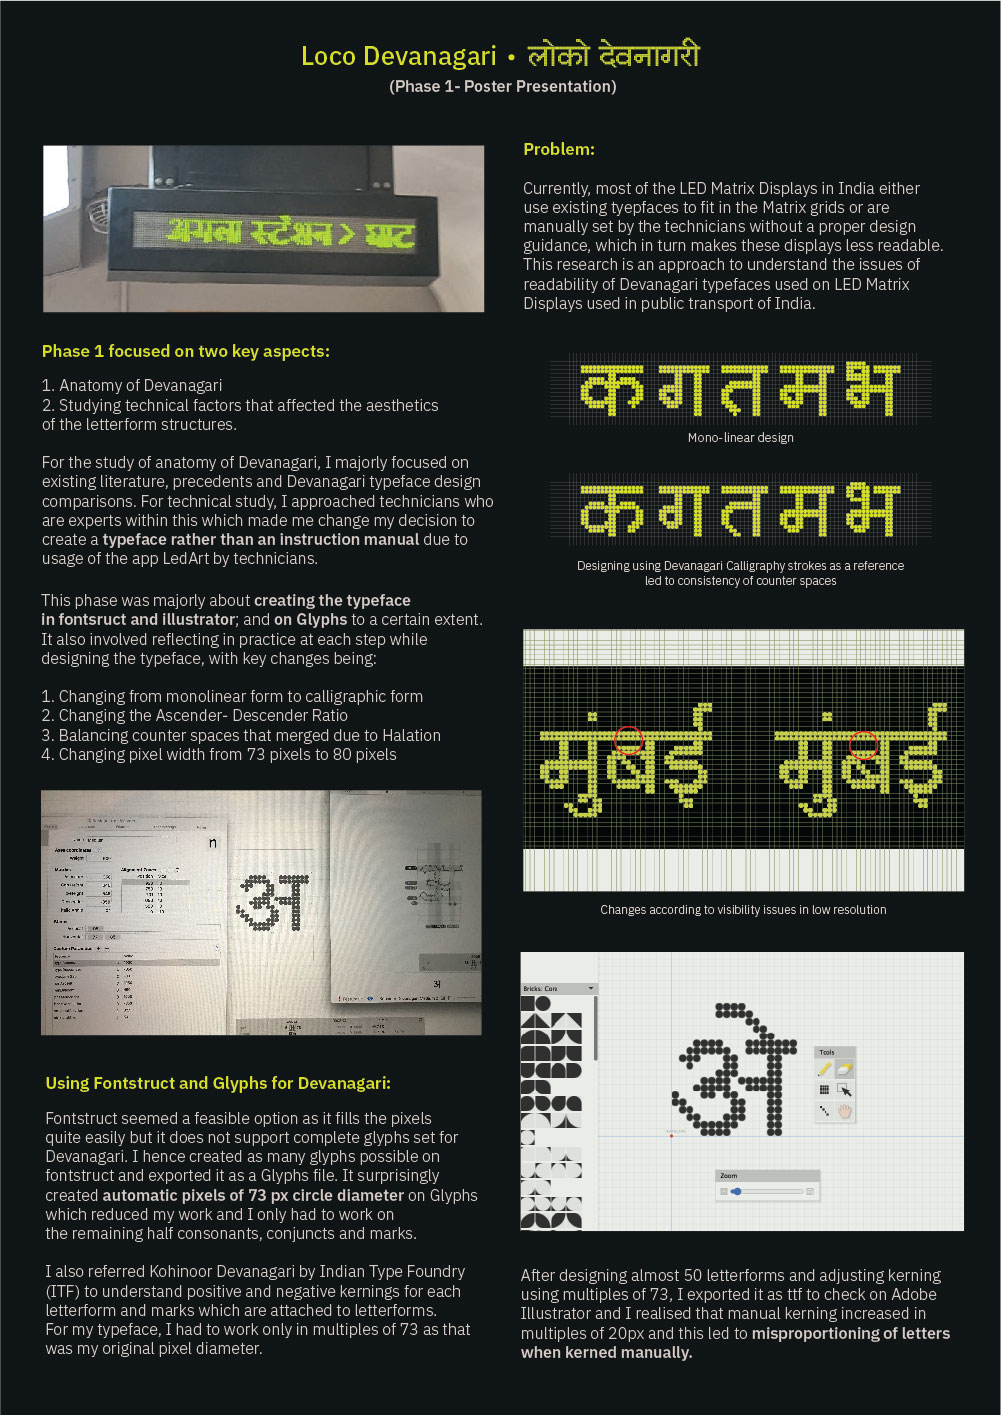 Phase 1 focused on two key aspects - 1. Studying the anatomy of Devanagari and 2. Studying technical factors that affected the aesthetics of the letterform structures. This phase also involved designing the typeface in Illustrator and Fontstruct; and on Glyphs to a certain extent.